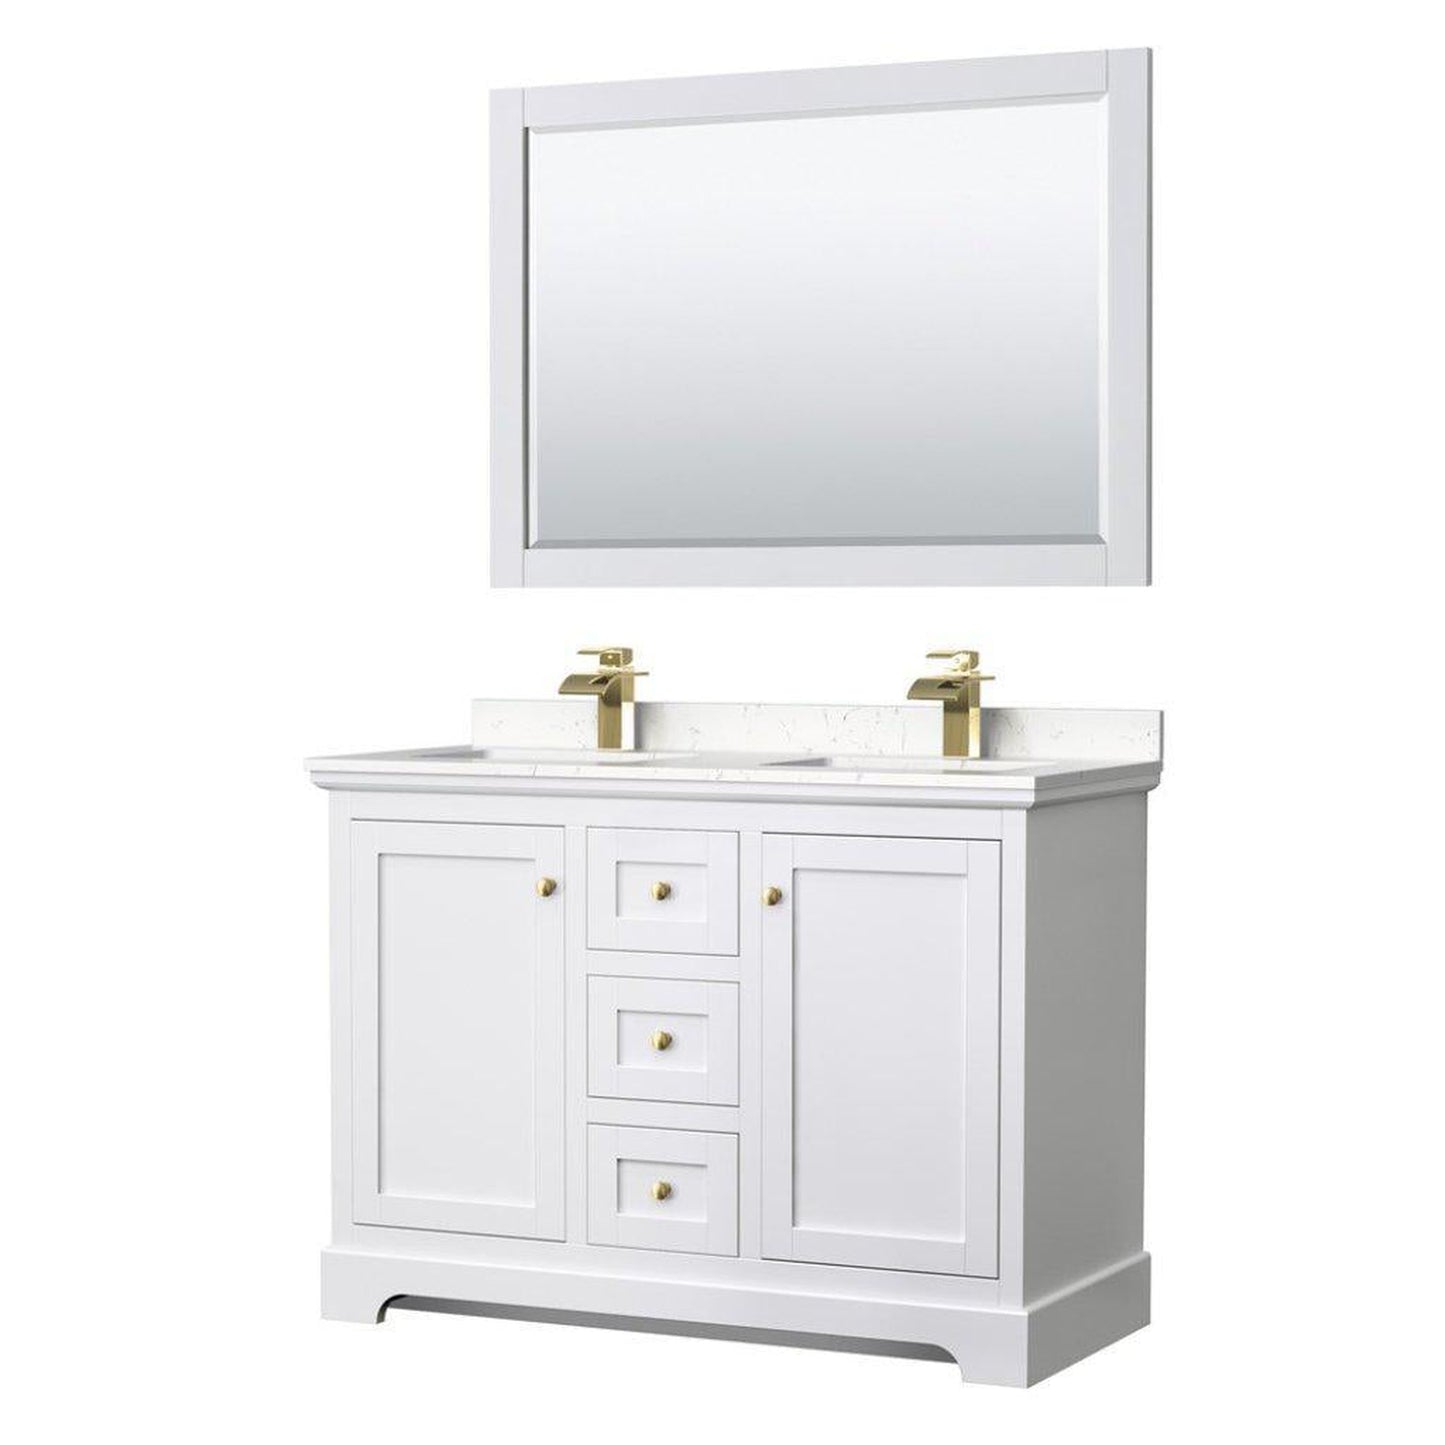 Wyndham Collection Avery 48" White Double Bathroom Vanity Set, Light-Vein Carrara Cultured Marble Countertop With 1-Hole Faucet, Square Sink, 46" Mirror, Gold Trims